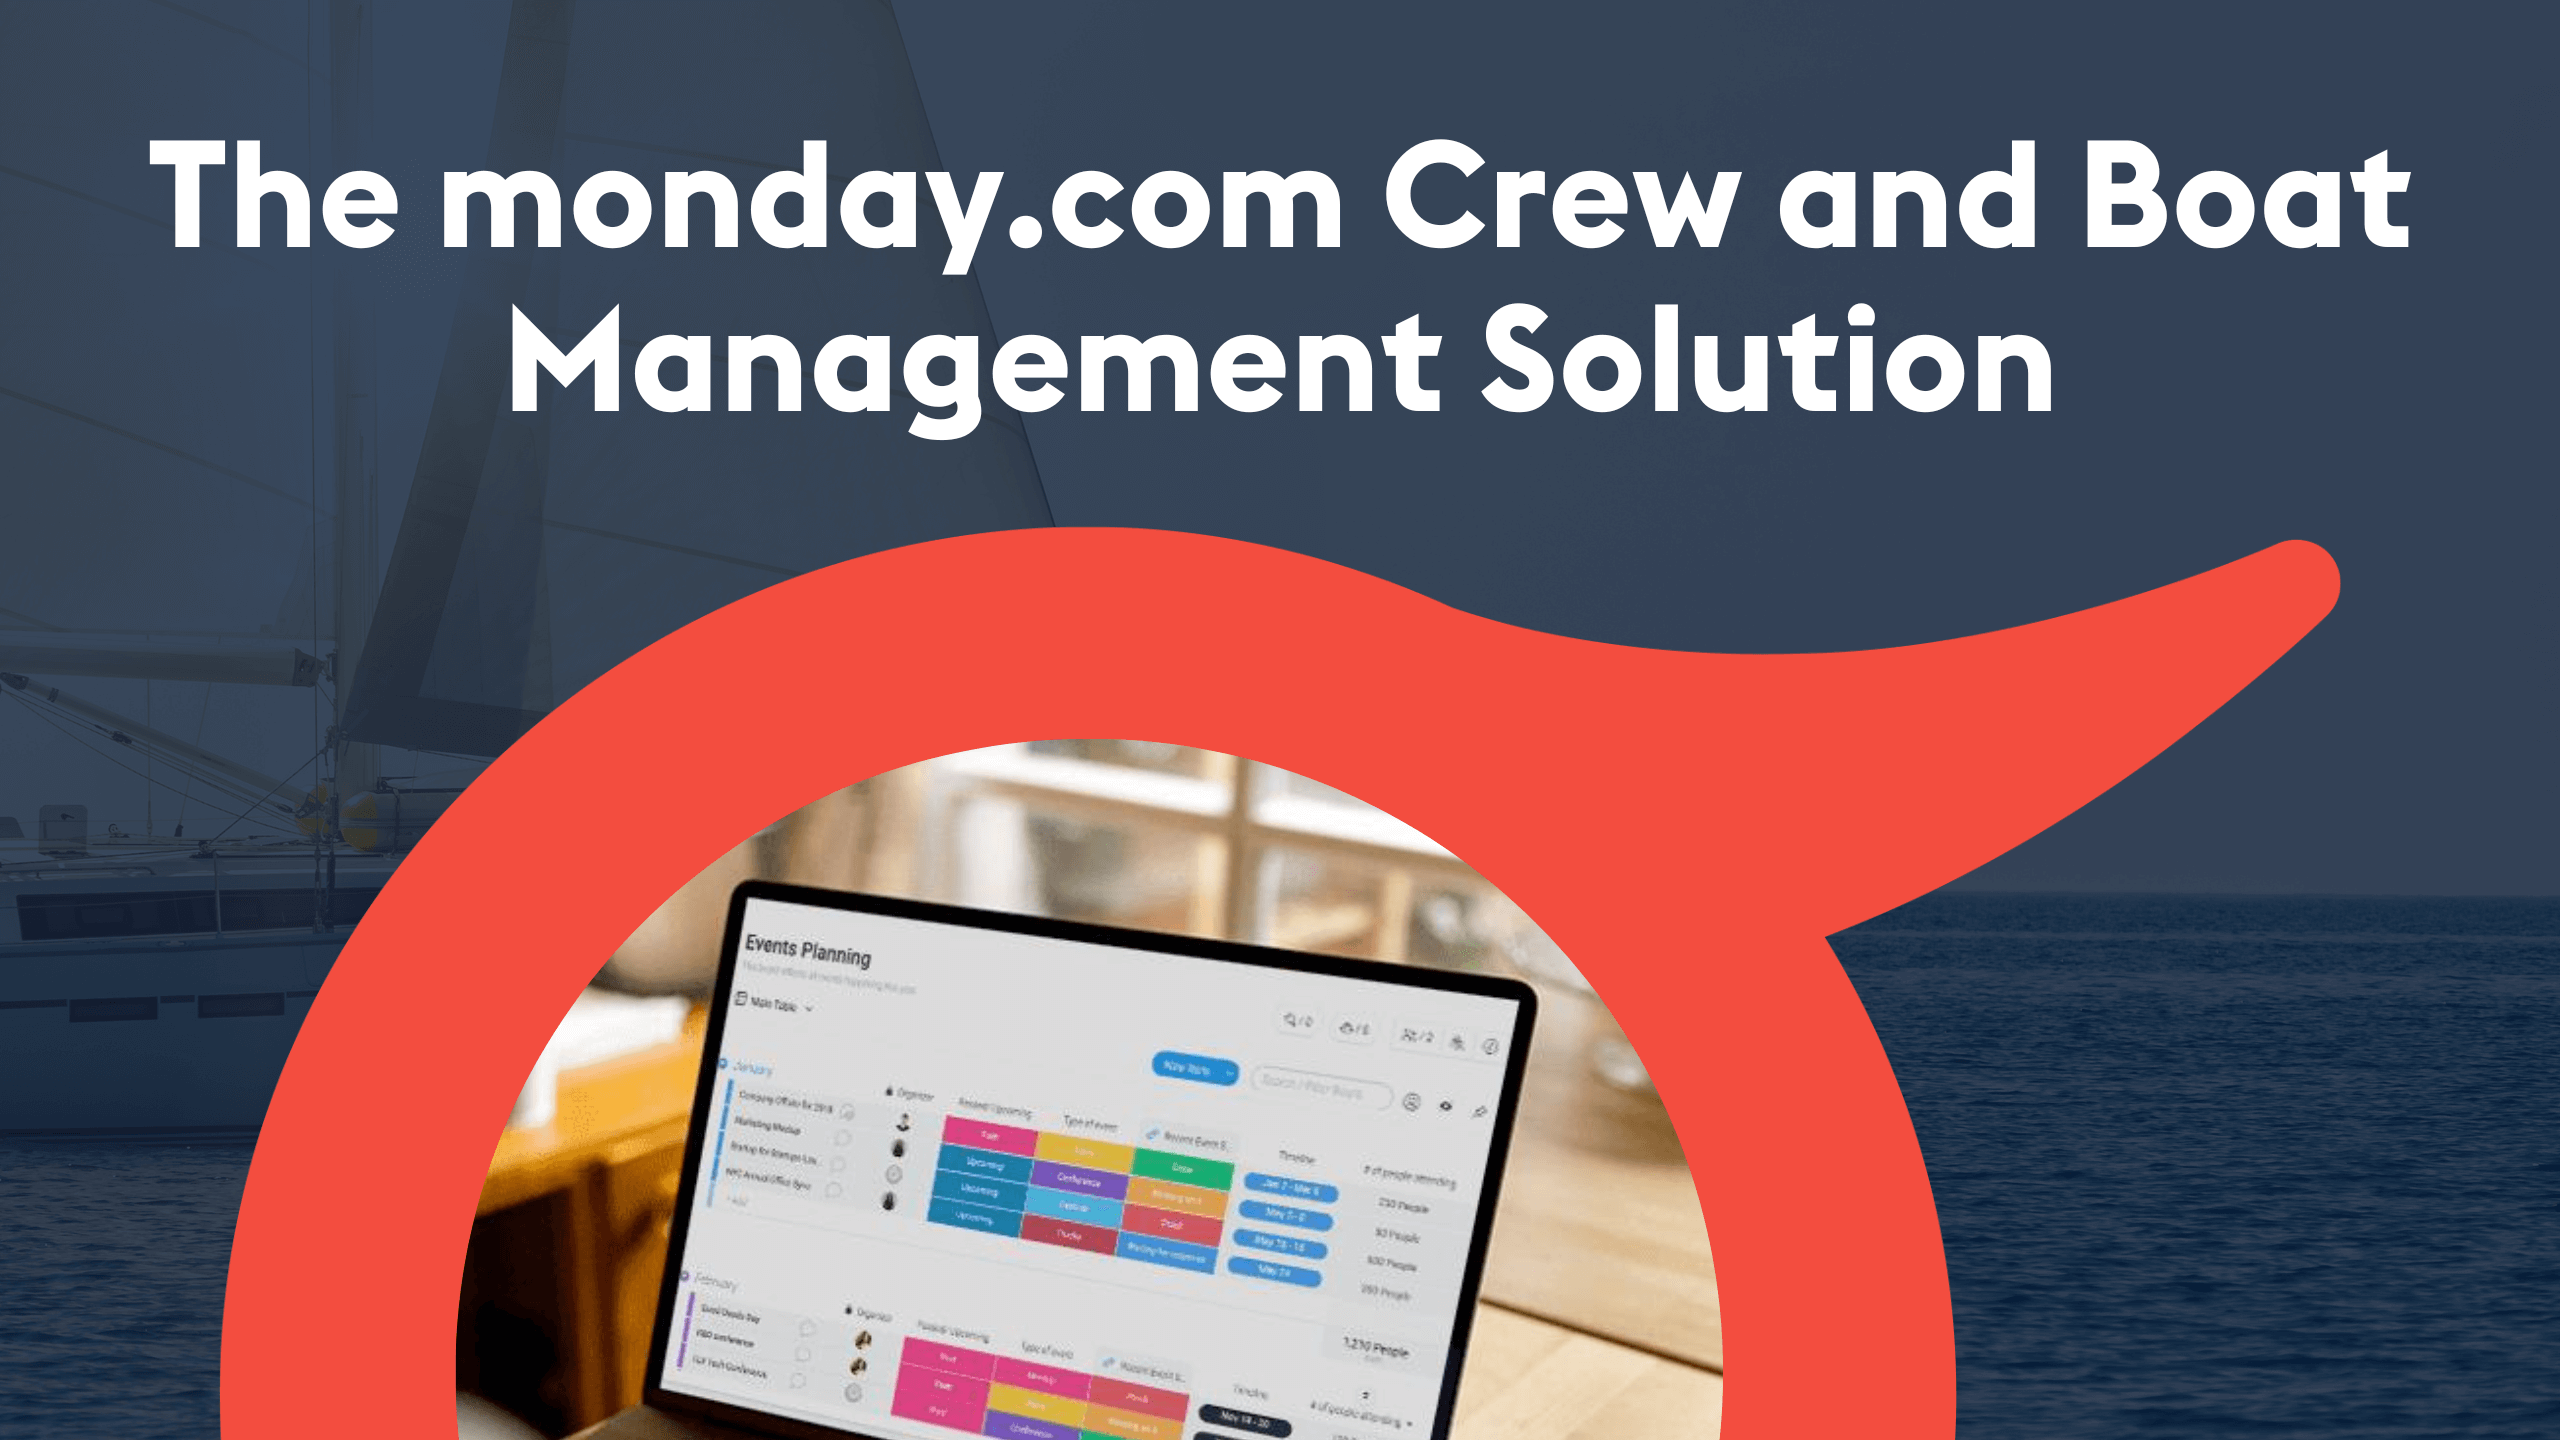 ProvidentCRM-CRM-The-monday.com-Crew-and-Boat-Management-Solution